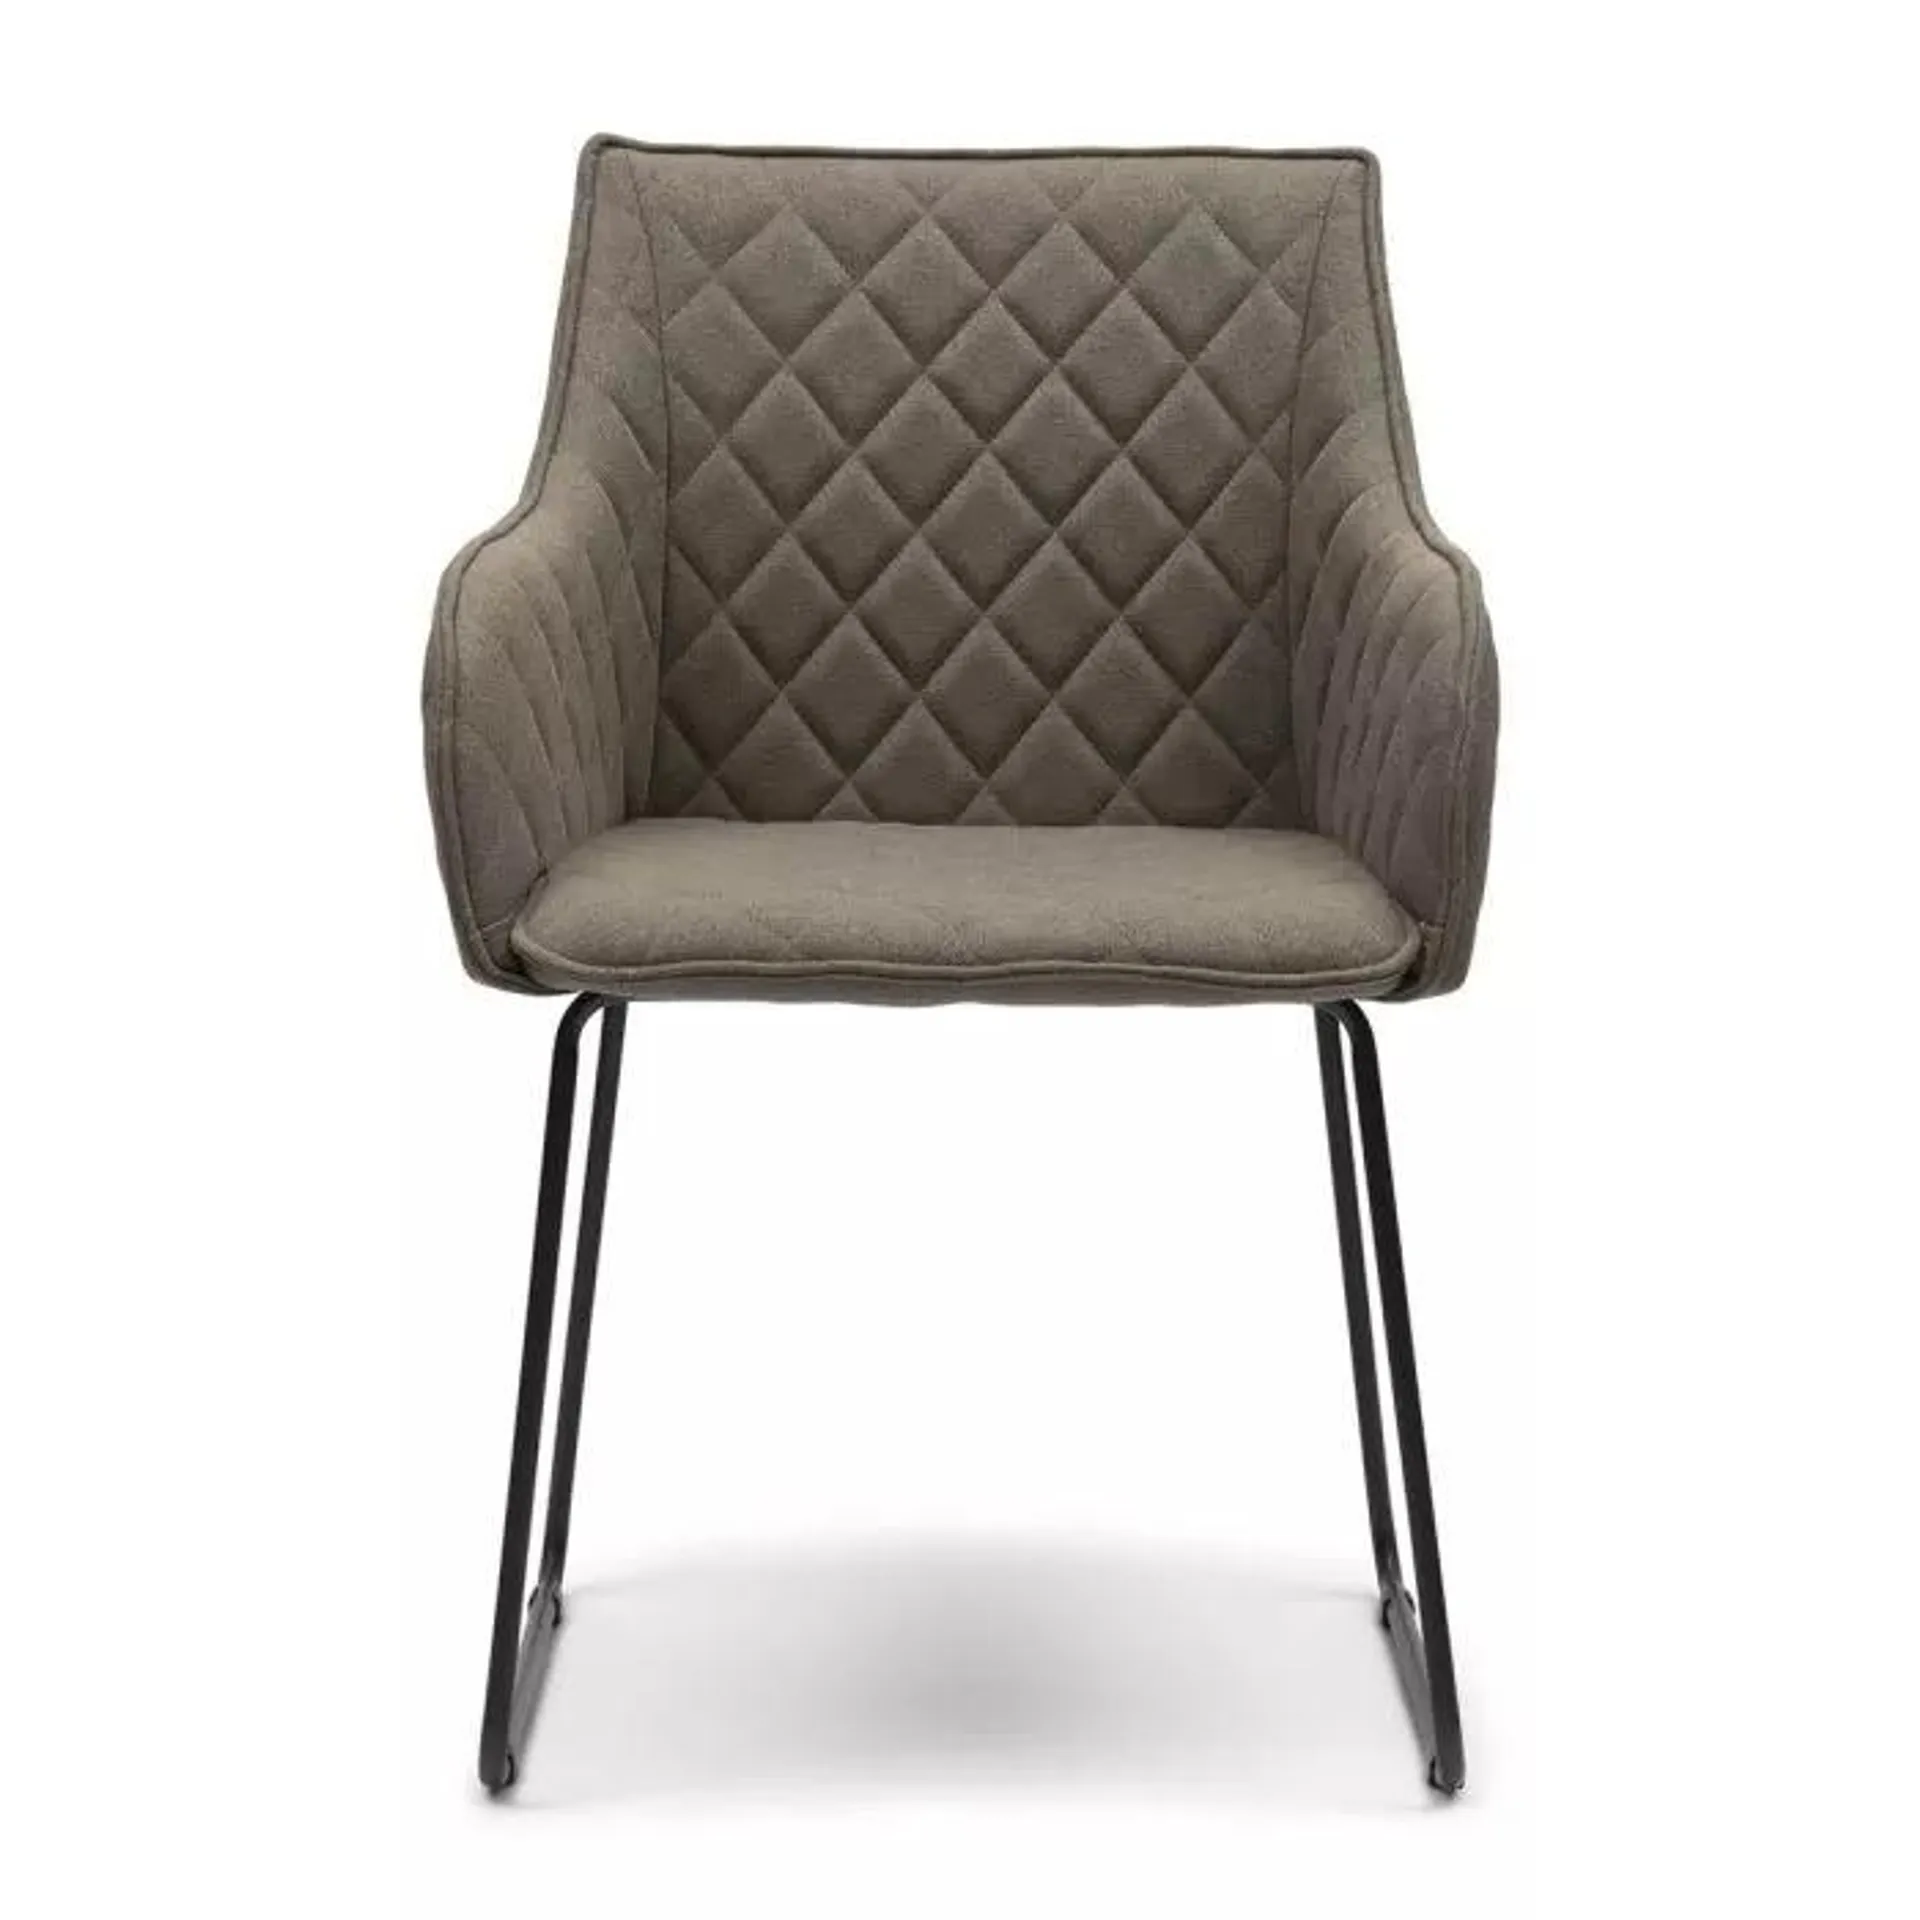 Dining Chair Frisco Drive, Dark Taupe, Belgium Weave